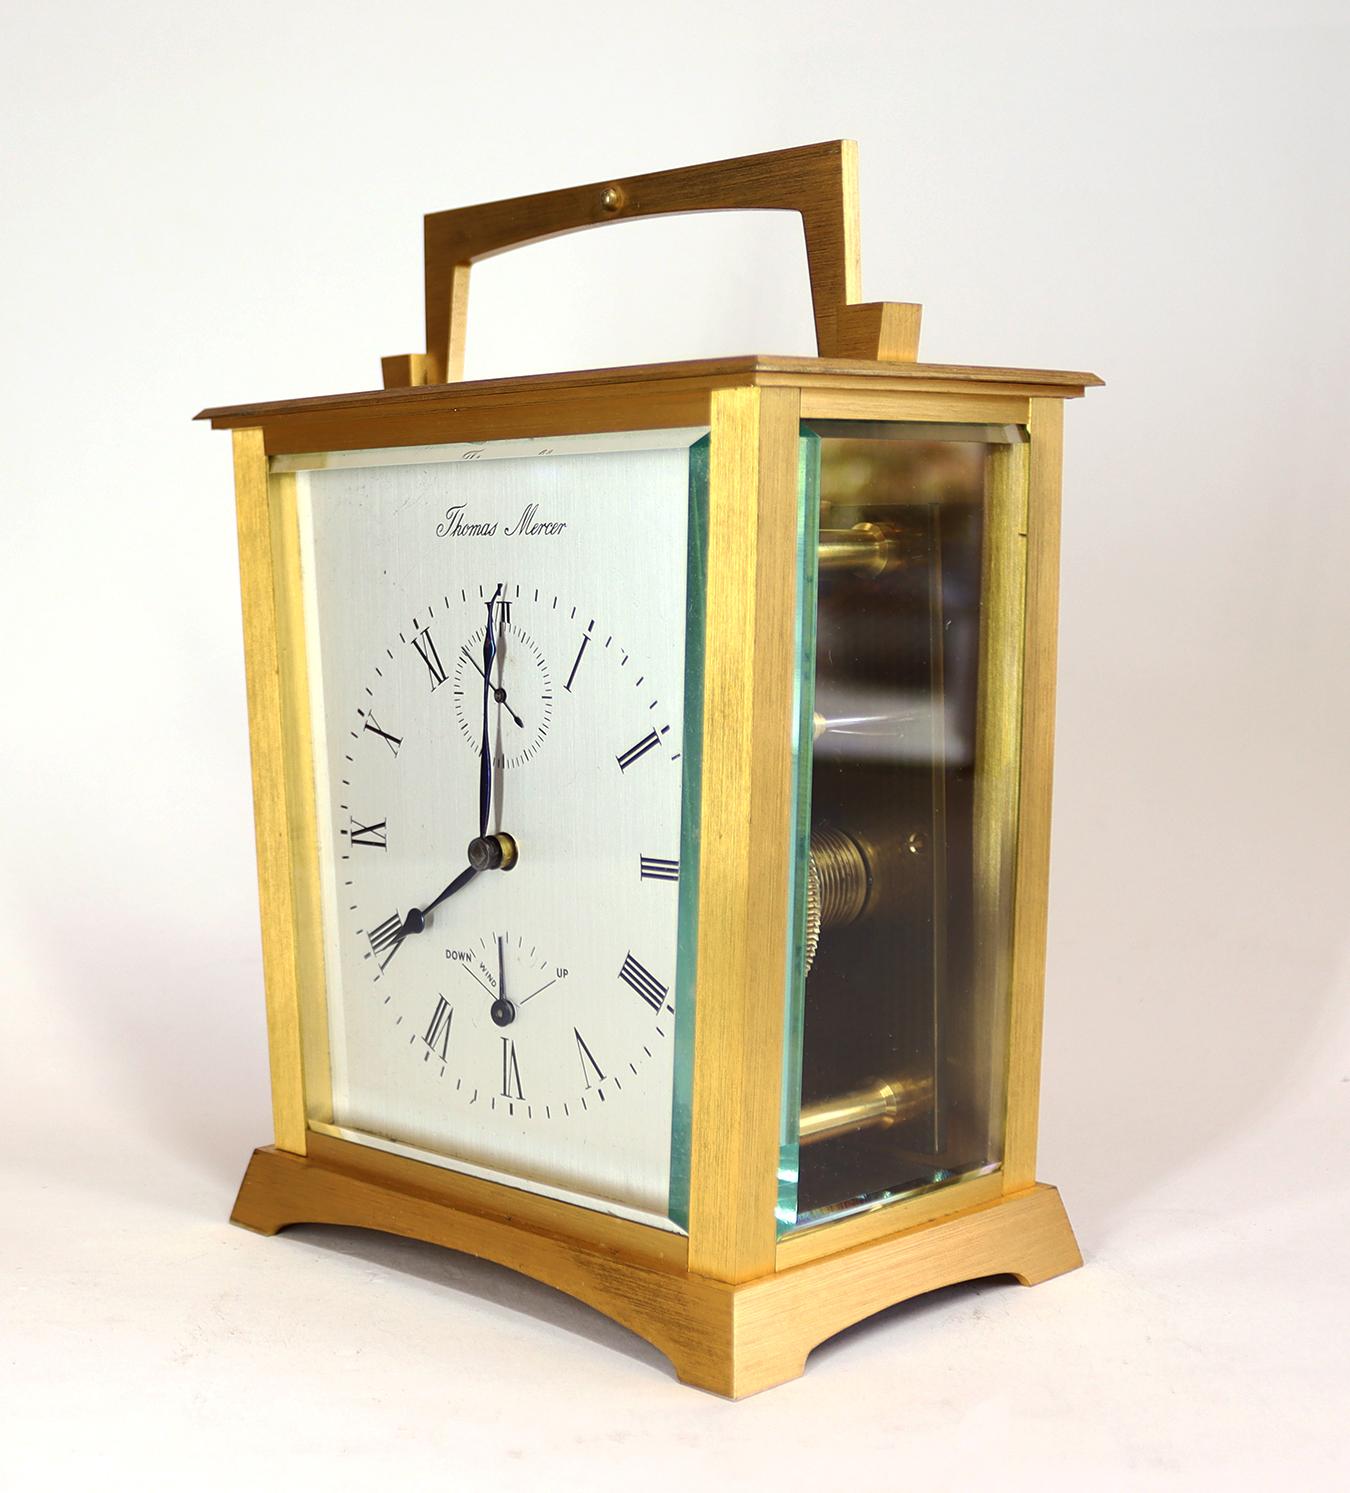 An English gilt brass chronometer carriage timepiece with original travelling case, key and bill of sale. The grained gilt tapering case has a folding handle with bevelled glass panel to the top, bevelled glass panels to the sides and a solid rear